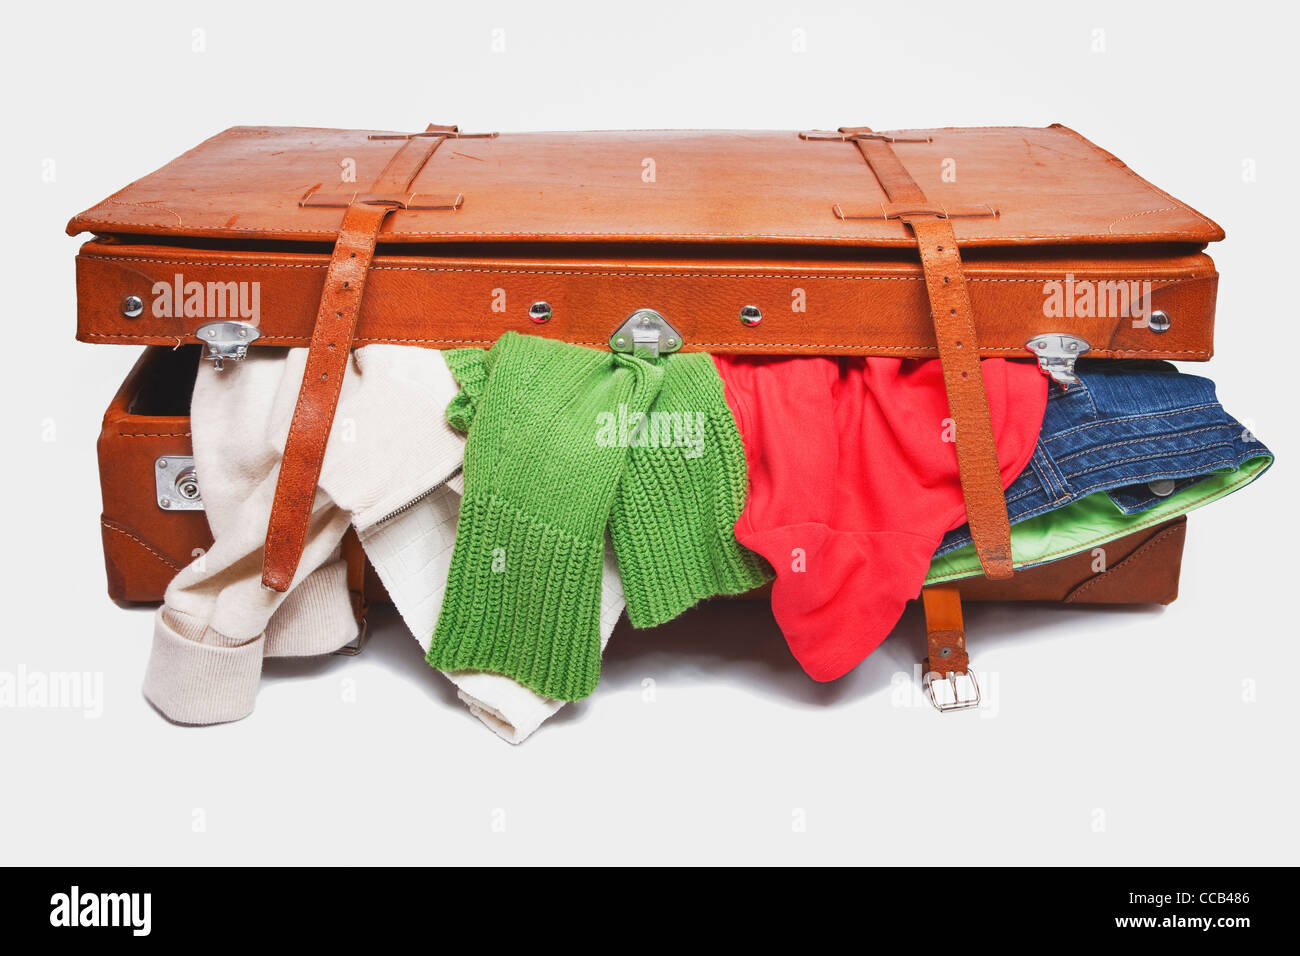 ein alter brauner Lederkoffer aus dem Kleidung herausquillt | clothes ooze out an old brown leather suitcase Stock Photo